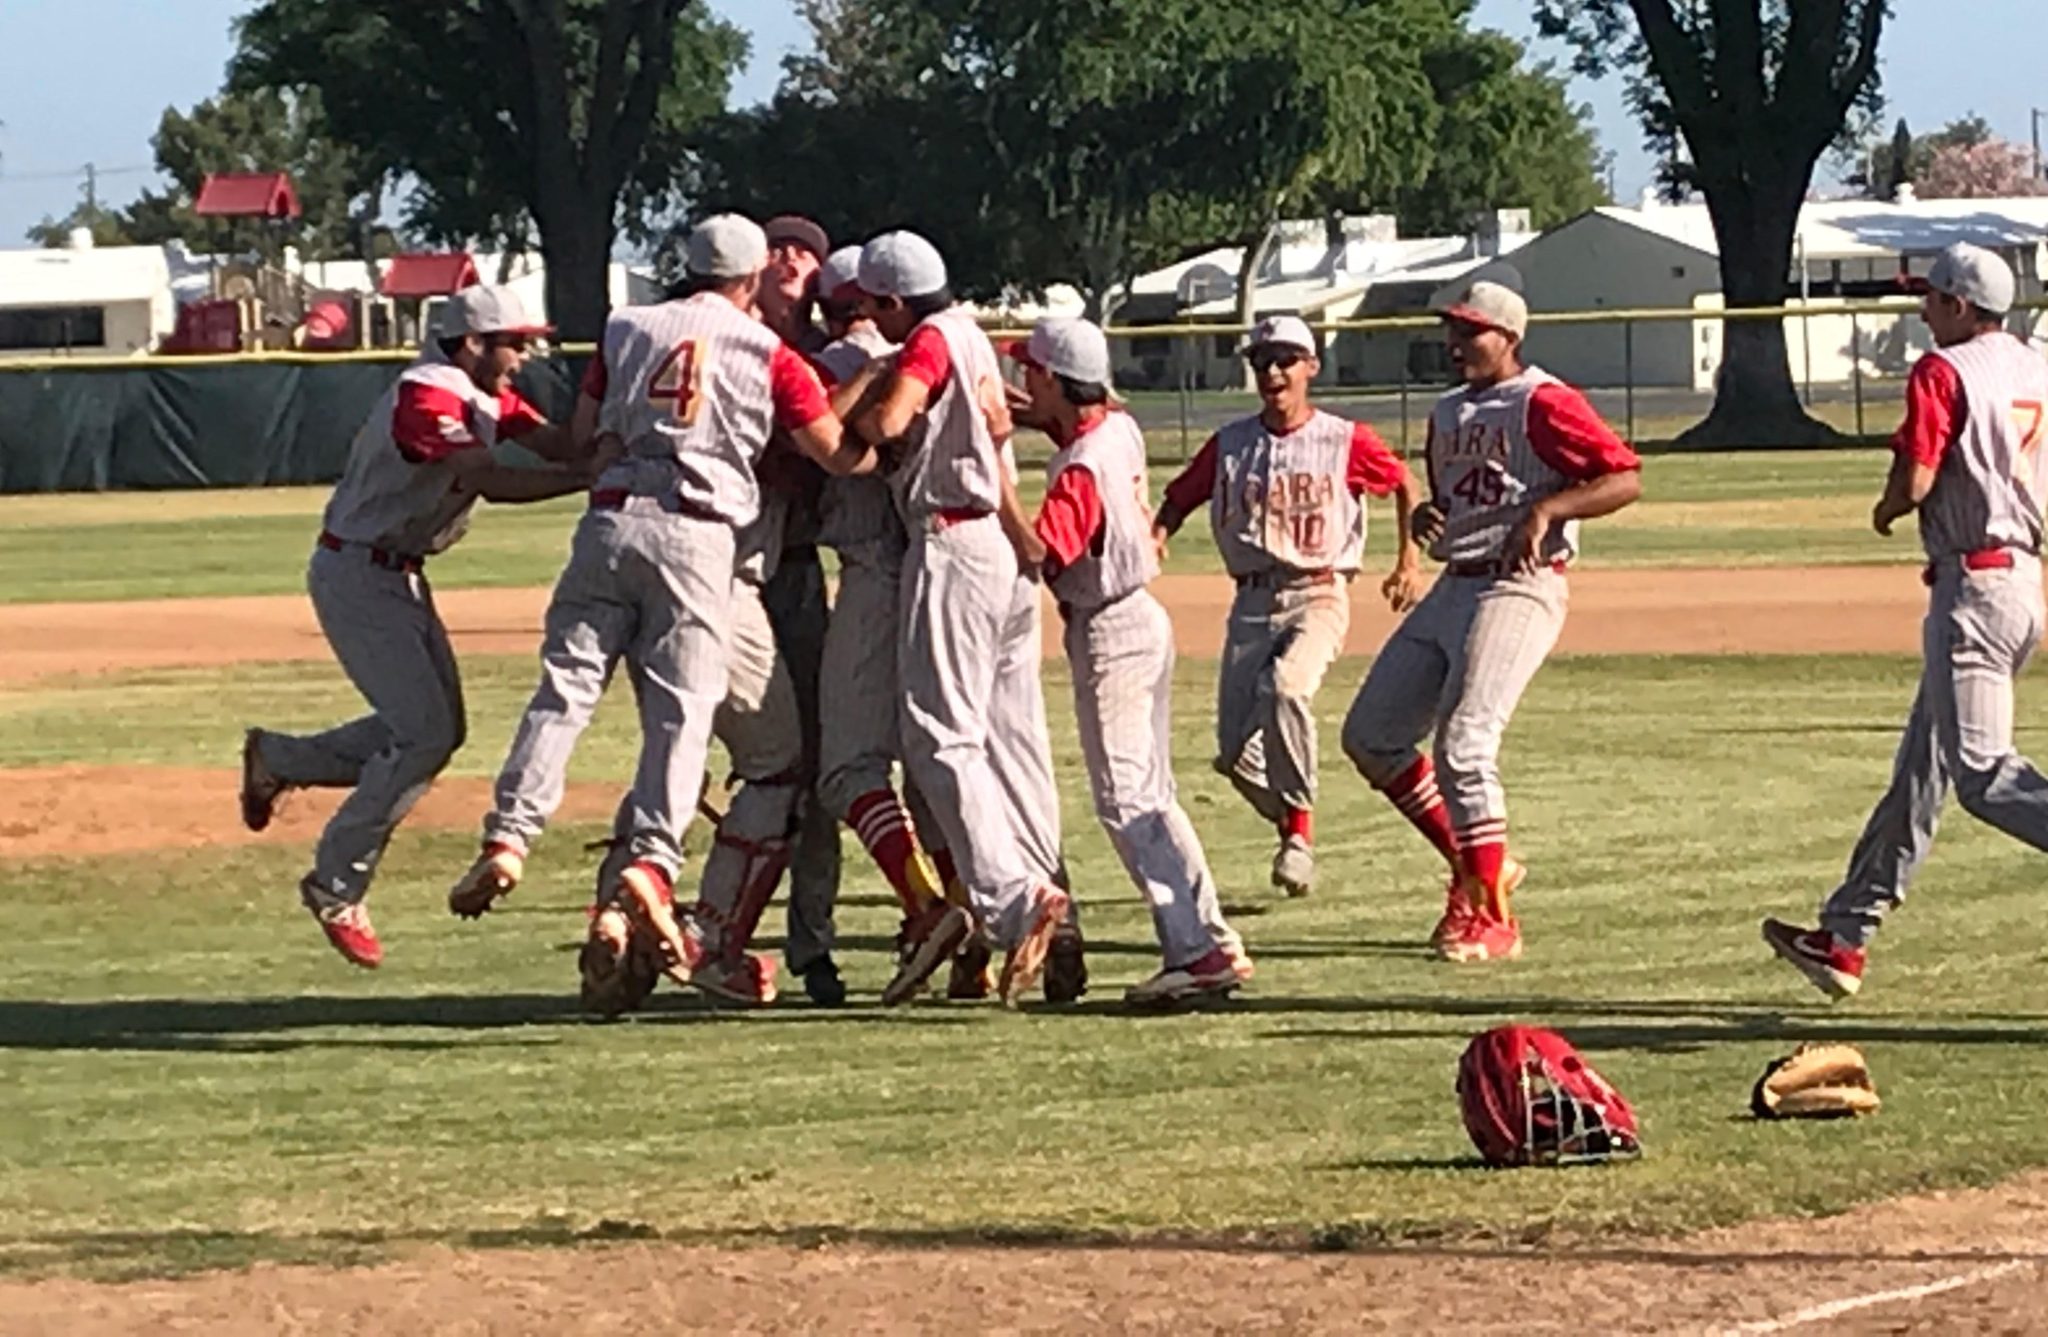 Loara baseball team wins outright league title with 20 victory over